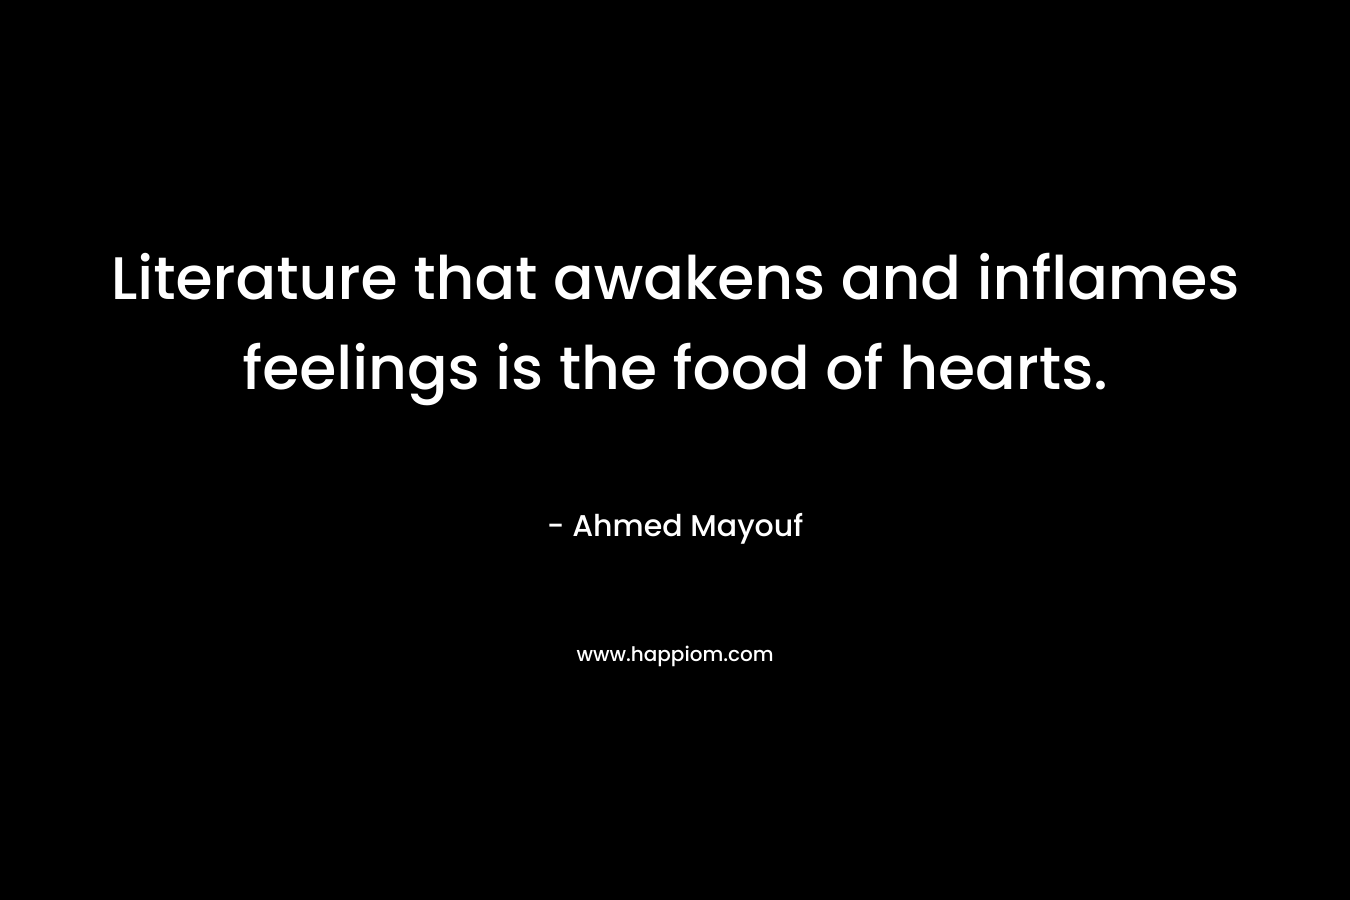 Literature that awakens and inflames feelings is the food of hearts.